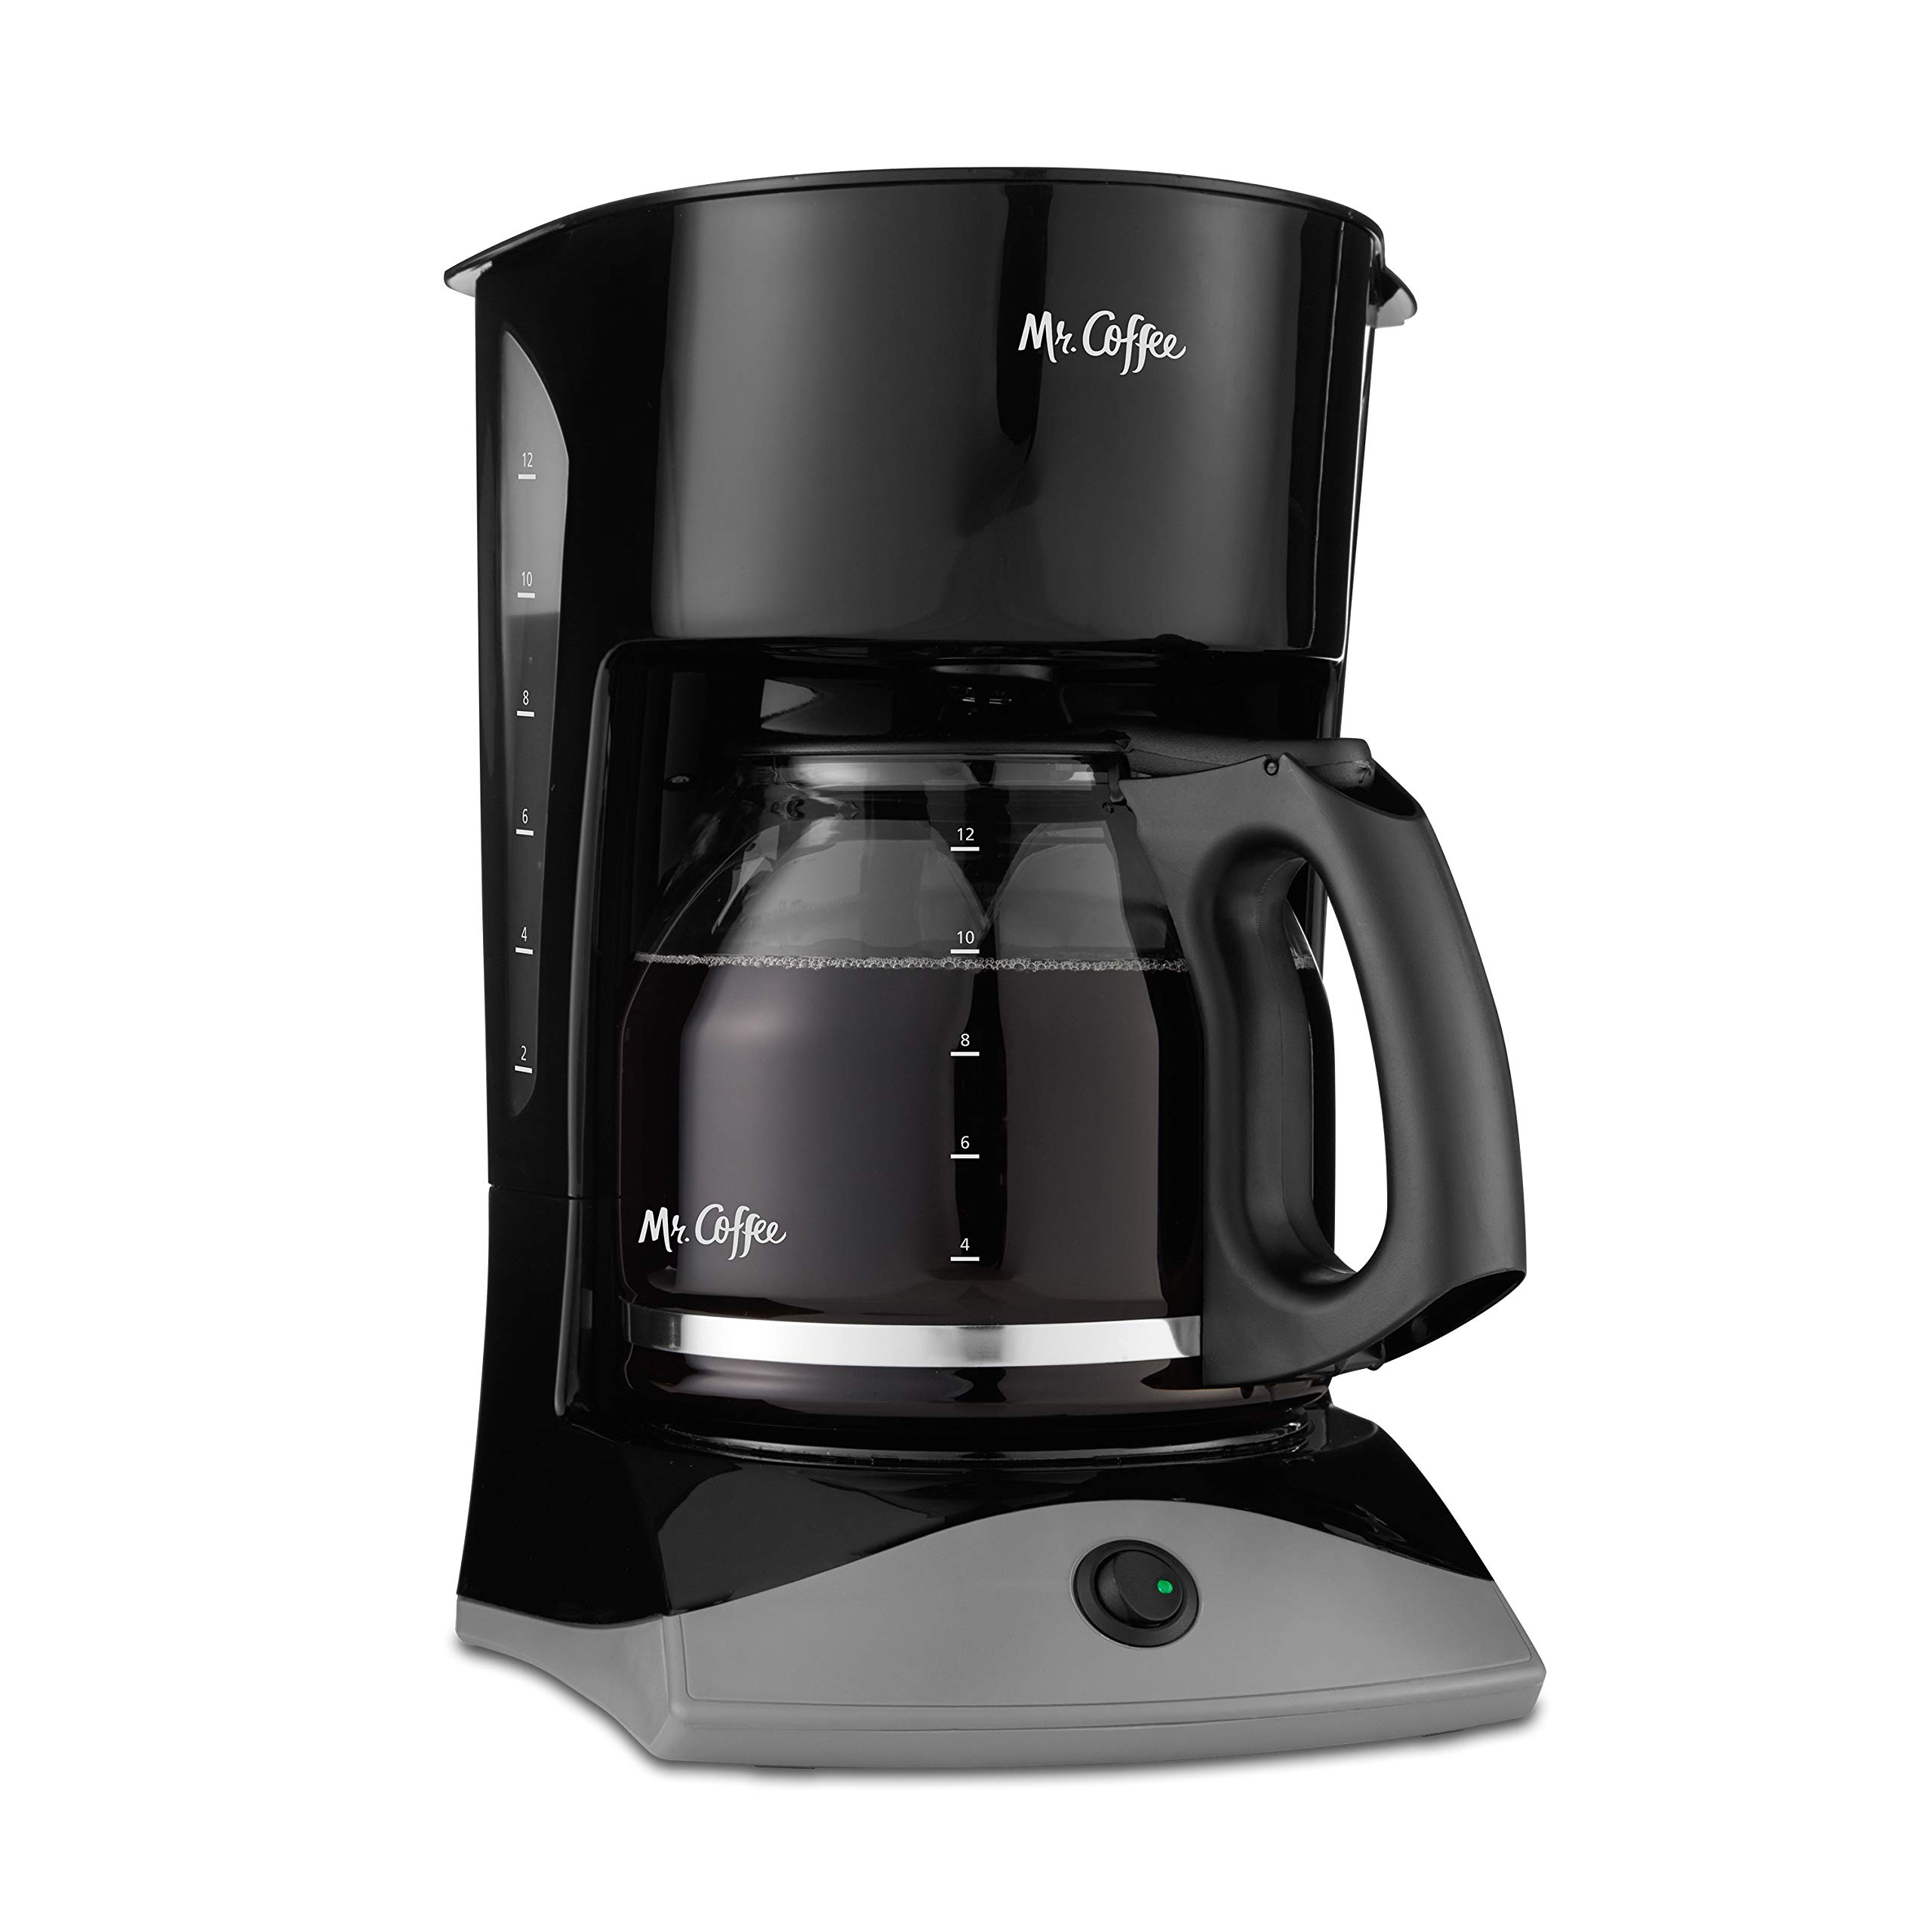 Ninja CE251 Programmable 12-Cup Coffee Maker ~ Machine Base Only